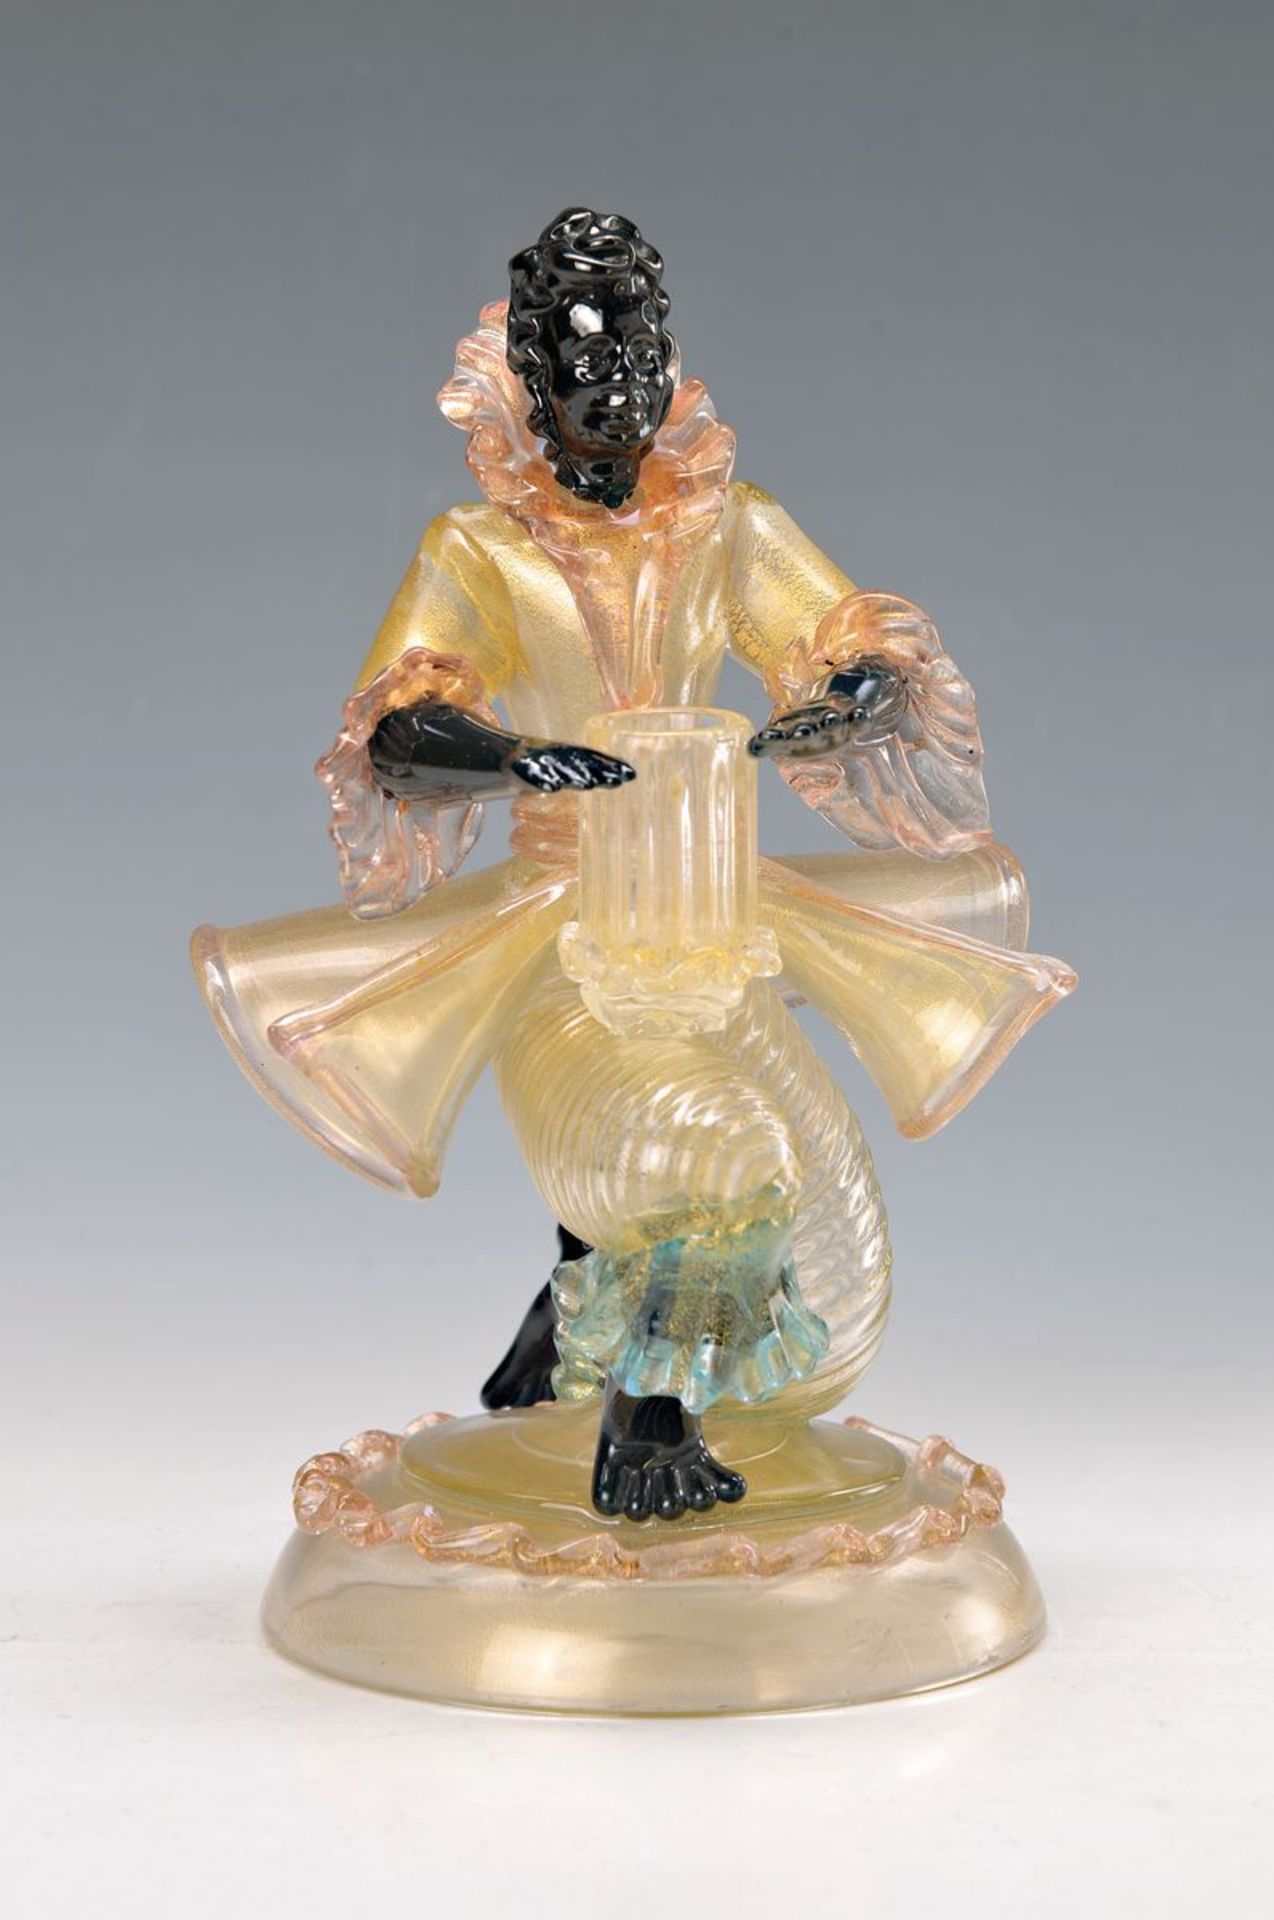 candlesticks, Murano Italy, 20th c., blown glass with melted gold powder, partially rose,turquoise